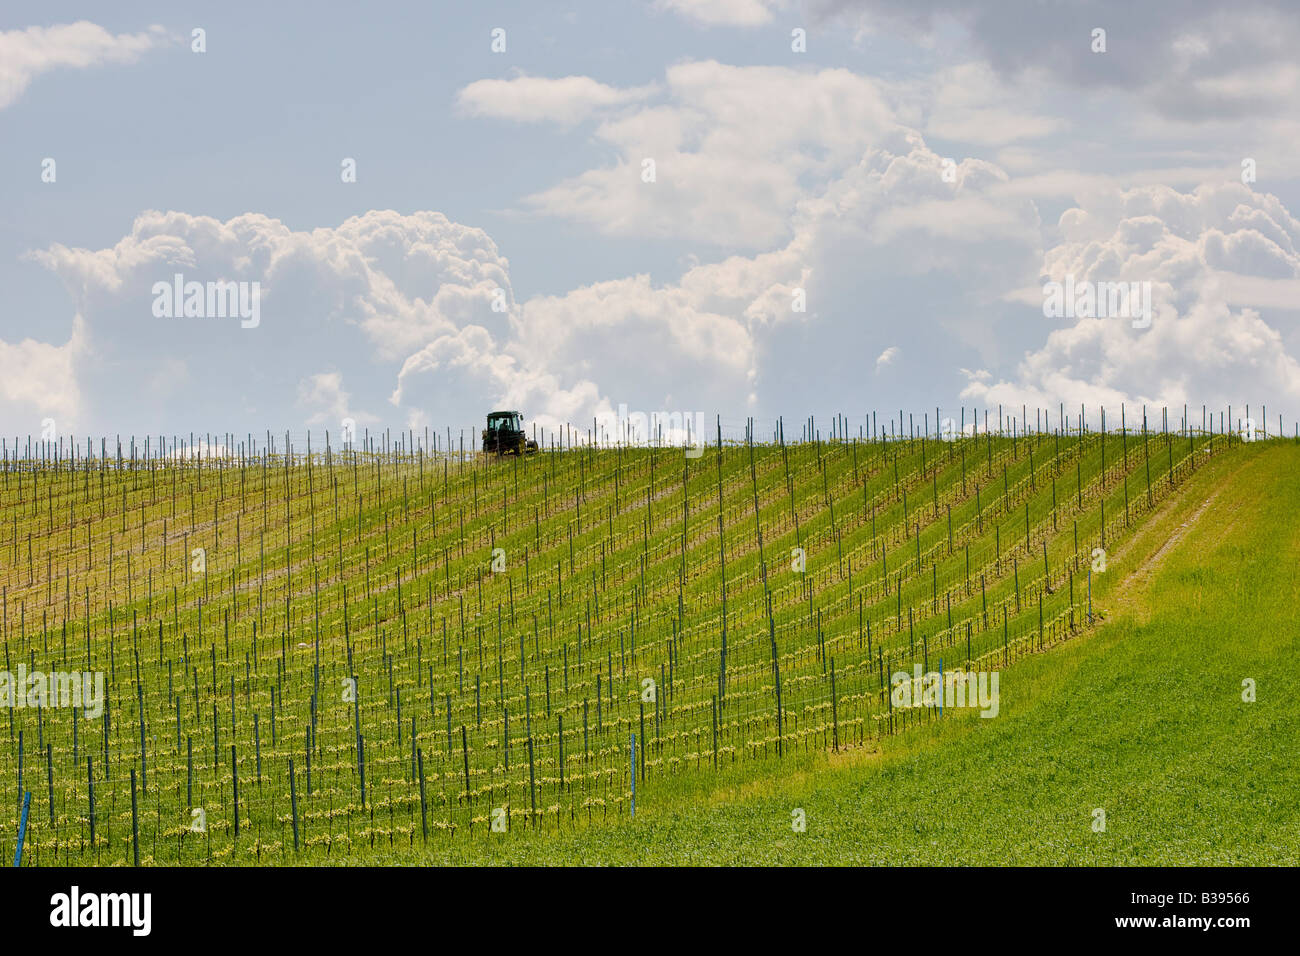 Vineyard landscape against an oncoming thunderstorm Stock Photo